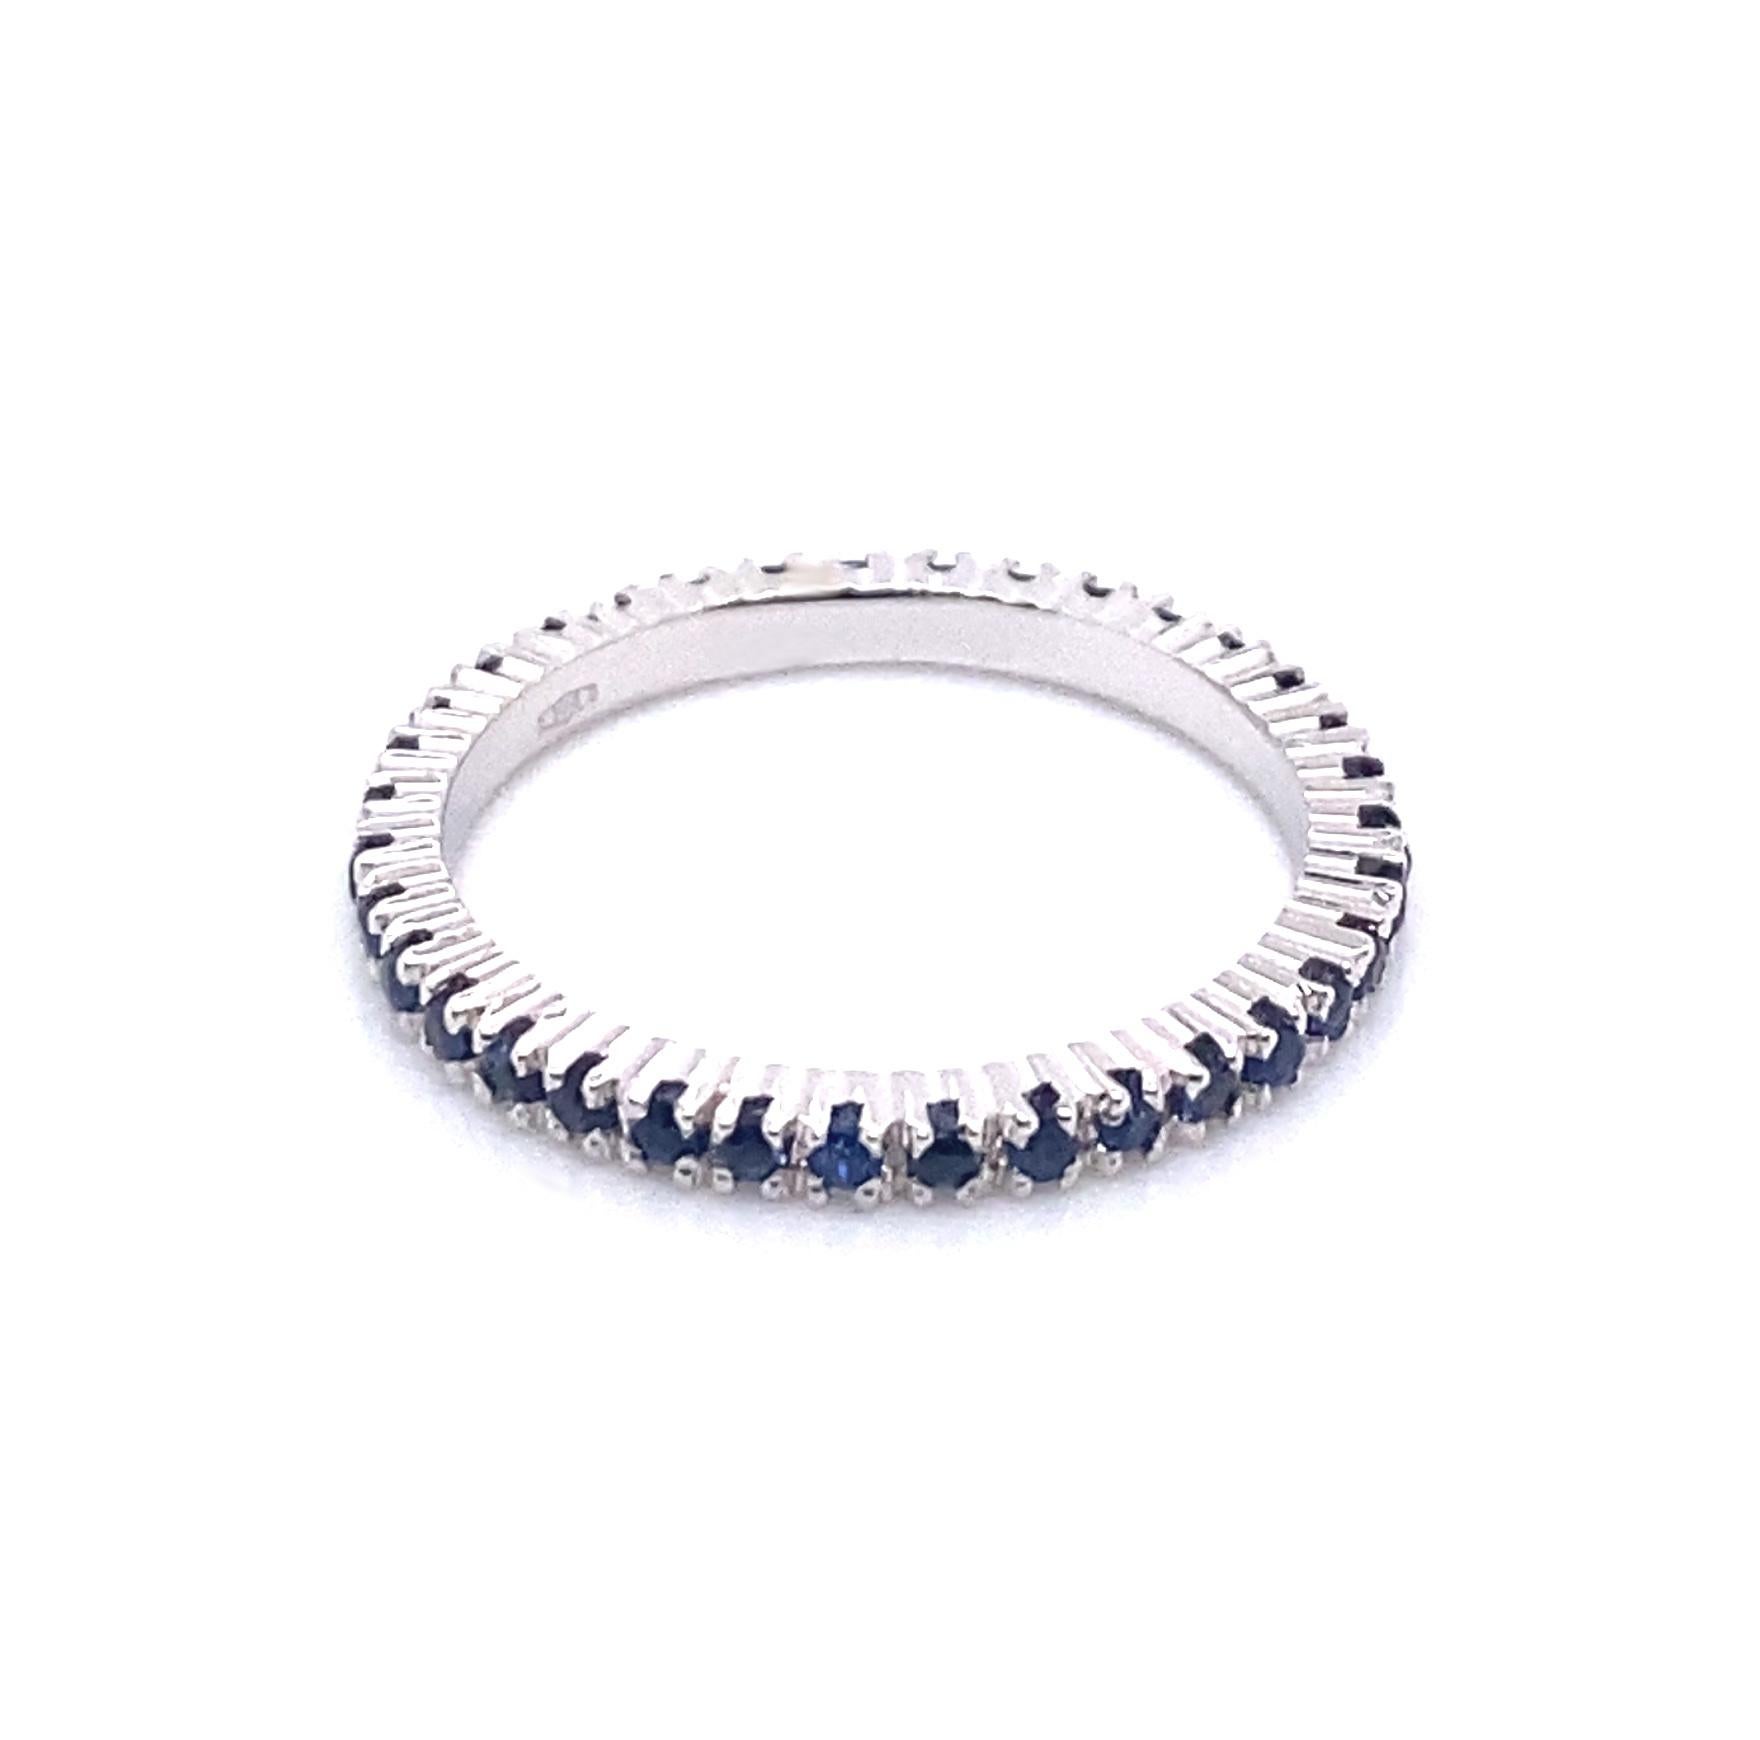 An 18-karat white gold and 0.46-carat blue sapphire eternity ring. Sleek and timeless, this ring adds depth and sparkle to your stack or wears beautifully on its own.

The photographed ring is a 13.5 EU/6.25 US ring size but it can be customized to